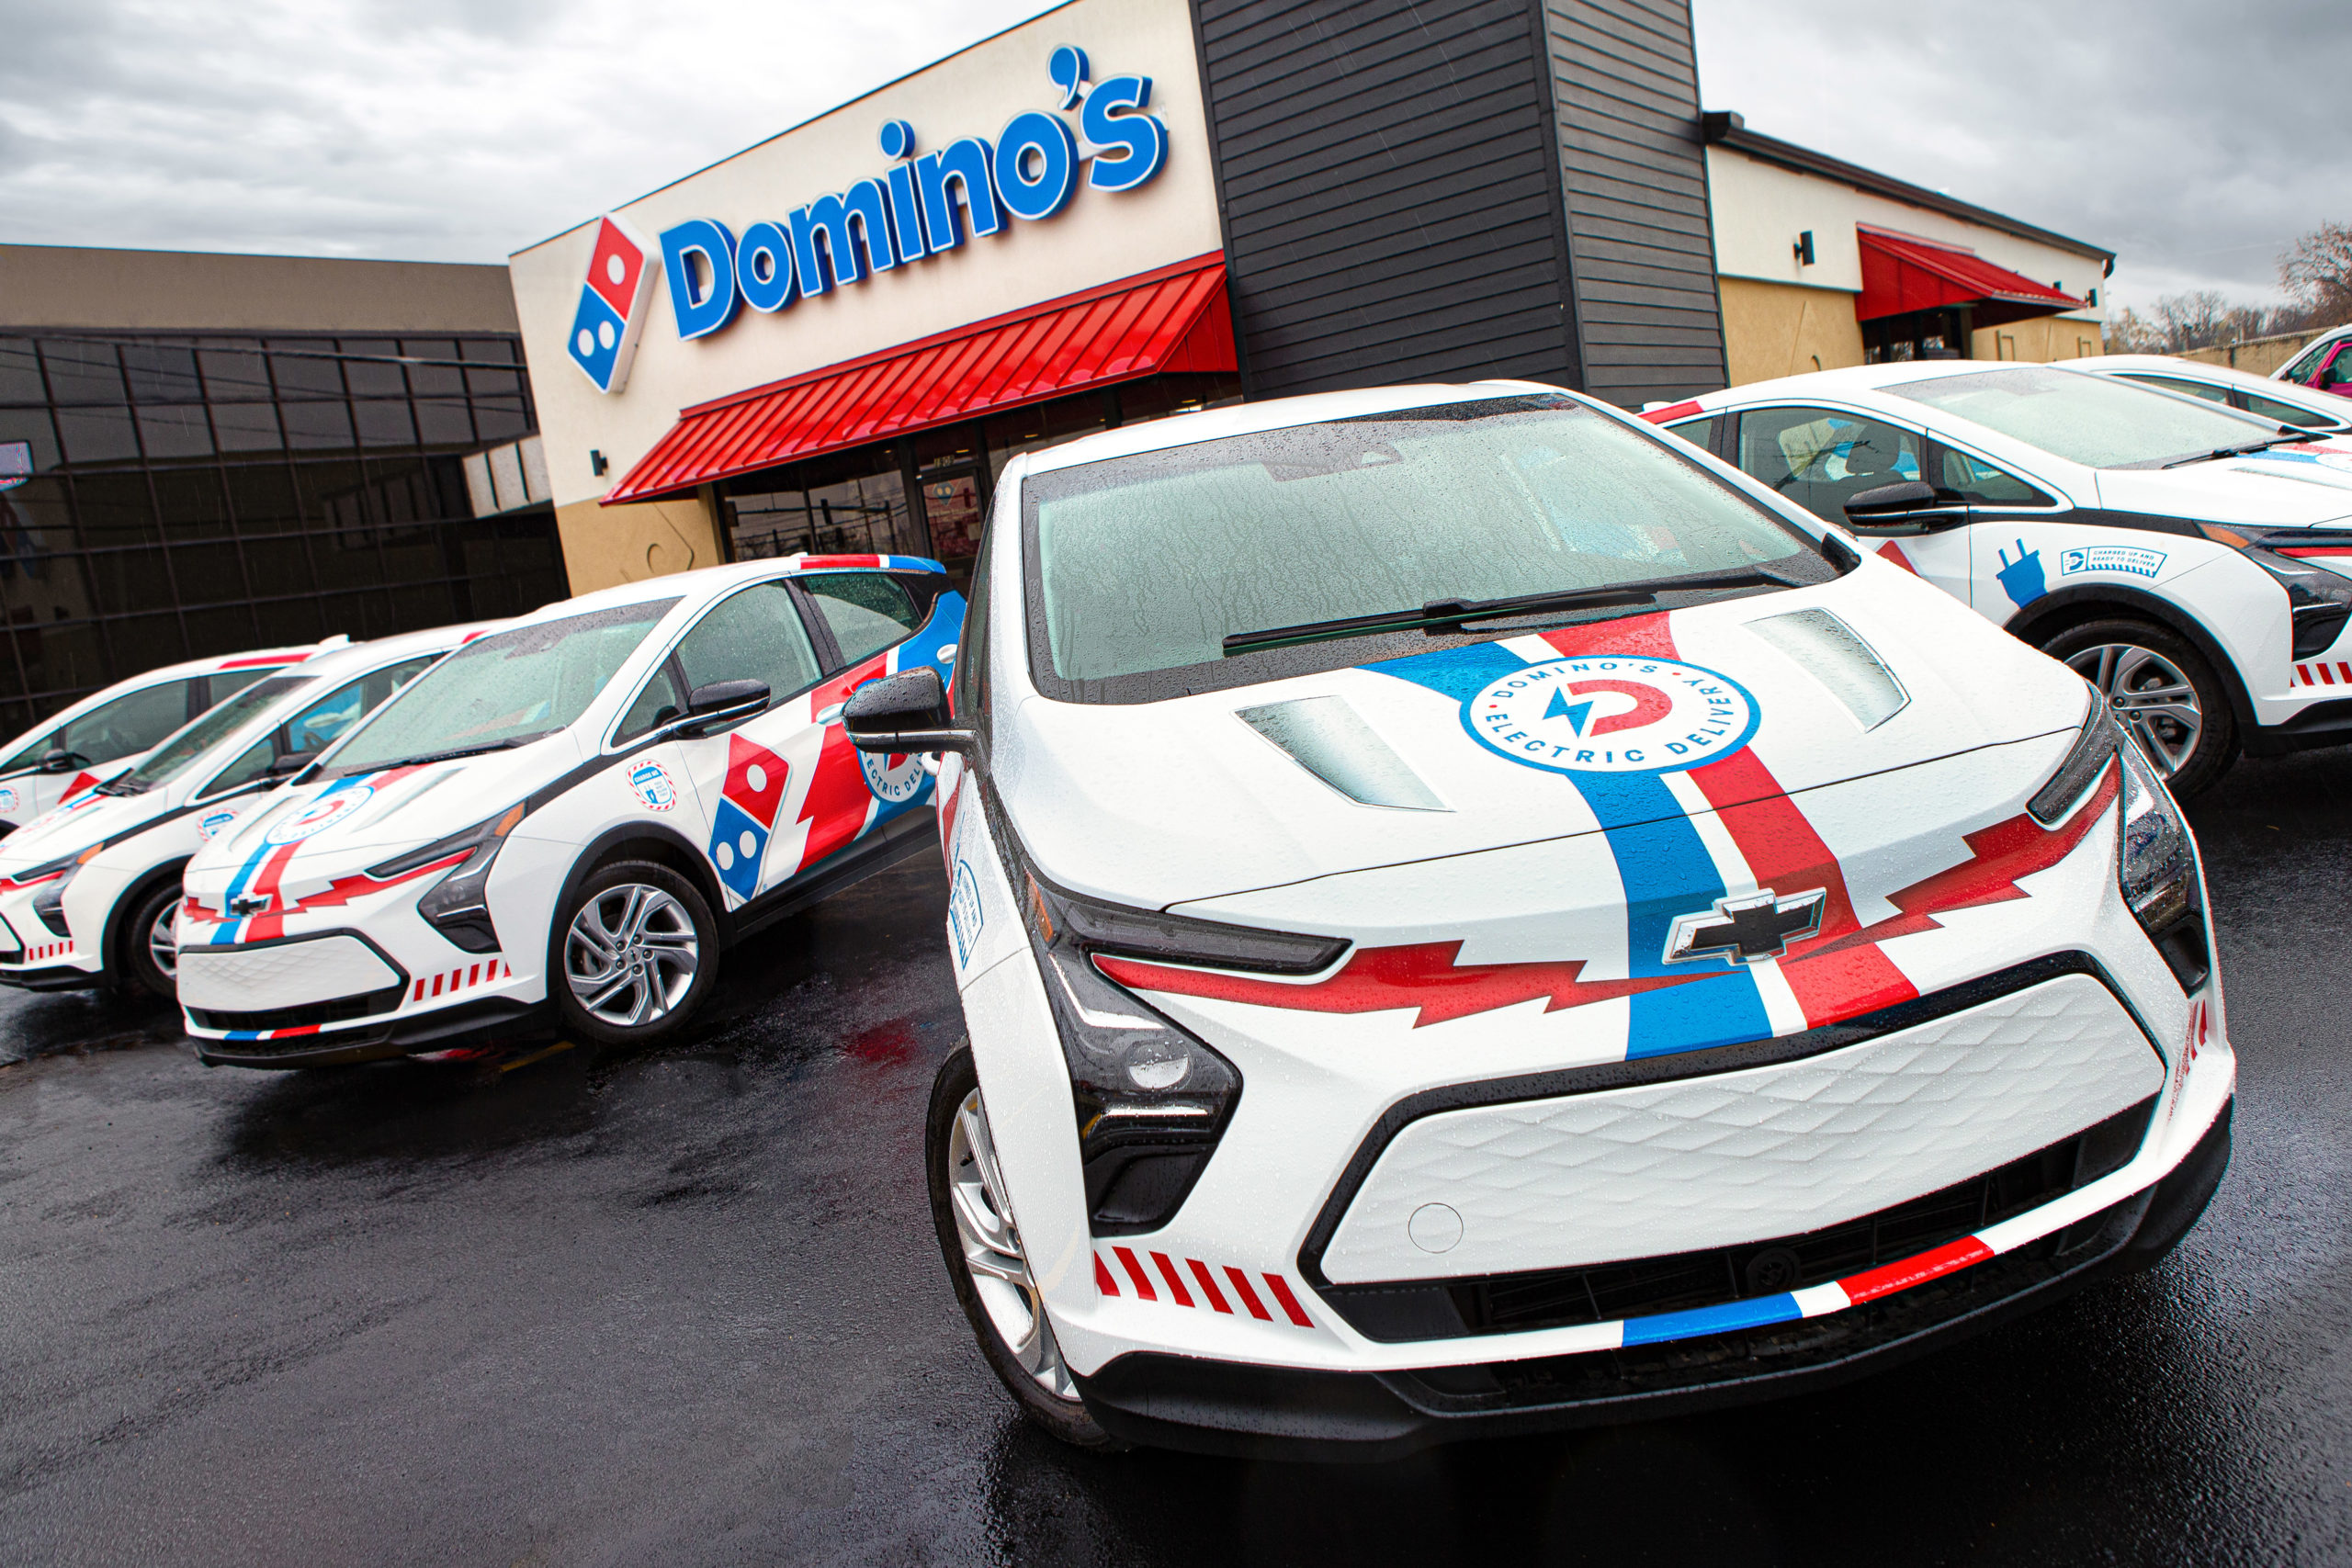 Domino's Pizza has purchased 800 Chevrolet Bolts for electric pizza delivery.